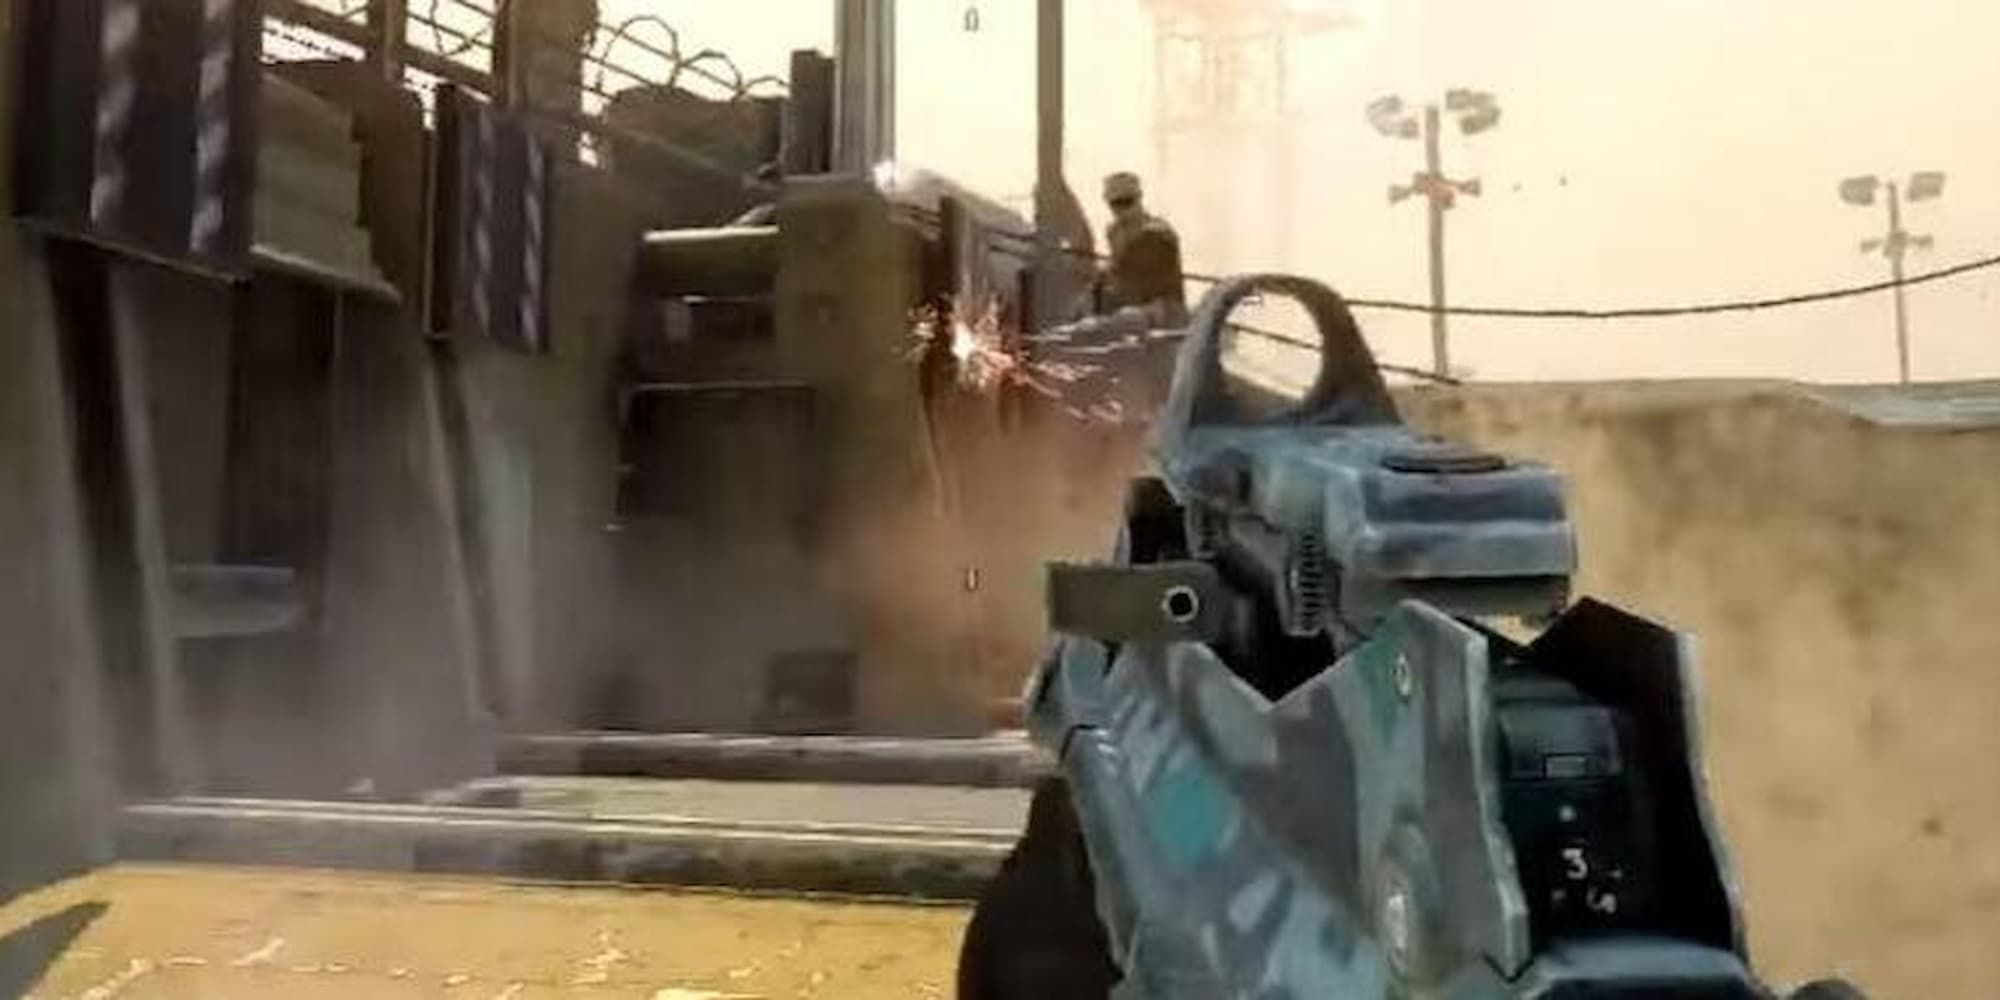 The Black Ops 1 Famas takes aim.